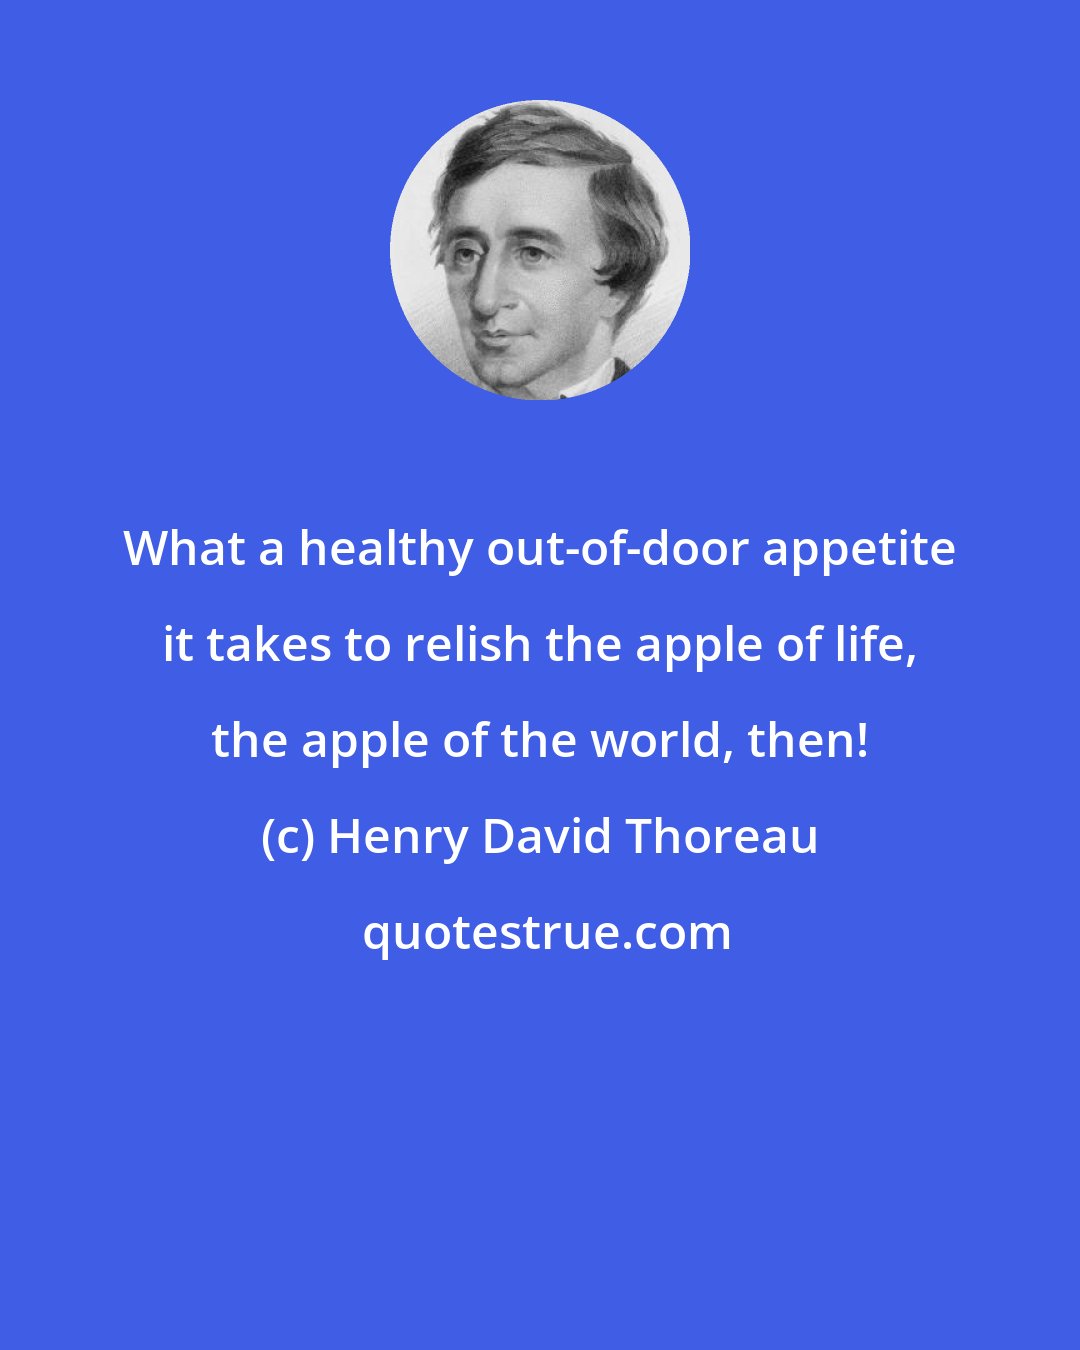 Henry David Thoreau: What a healthy out-of-door appetite it takes to relish the apple of life, the apple of the world, then!